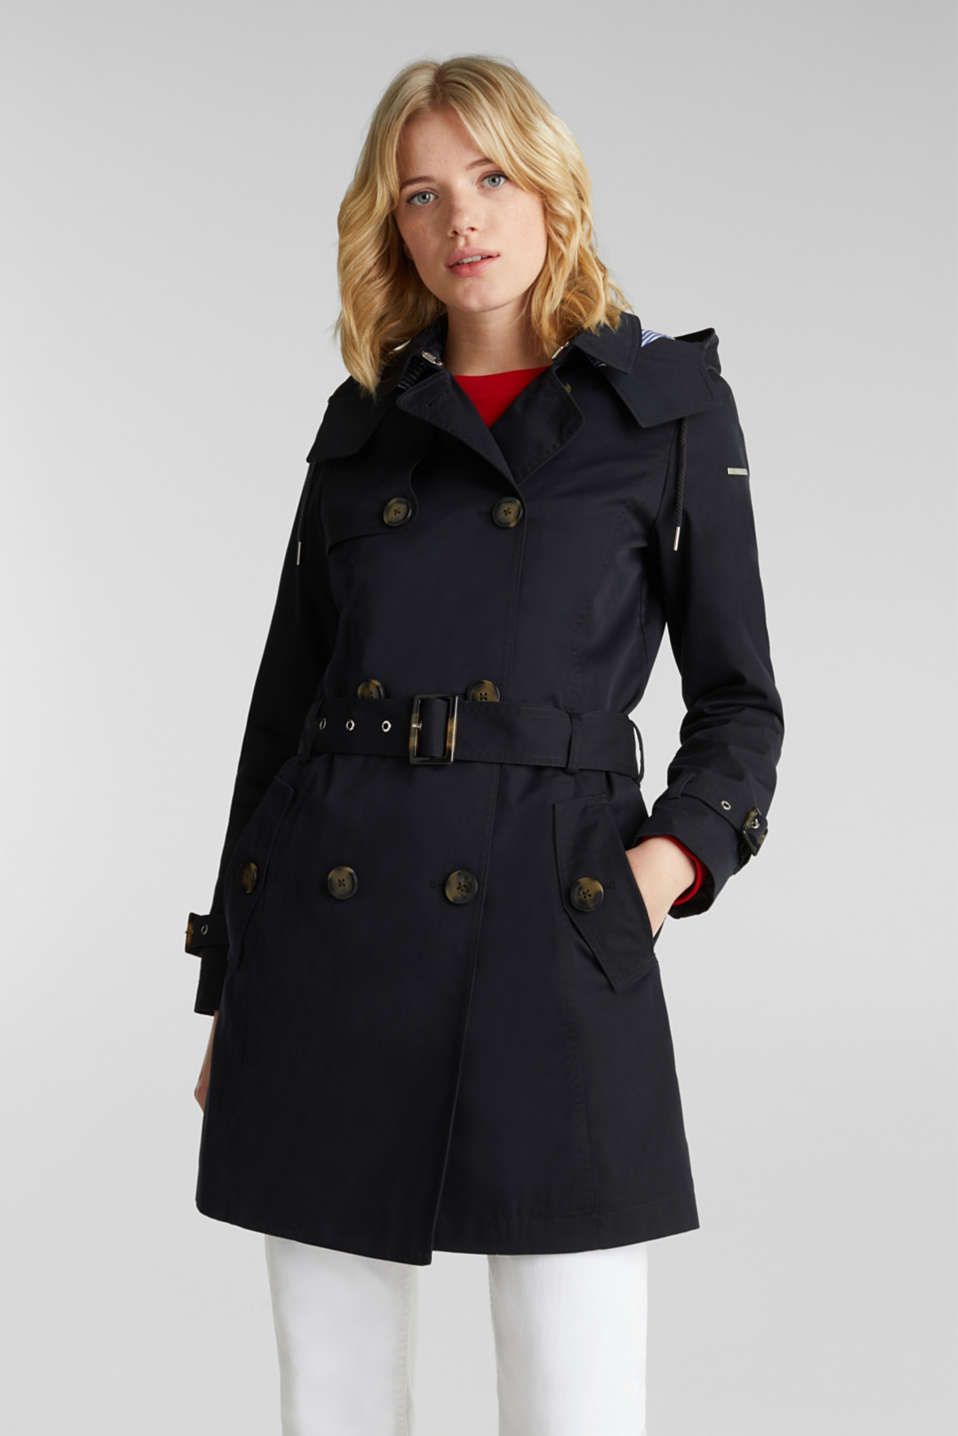 Esprit - Trench coat with an adjustable hood at our Online Shop